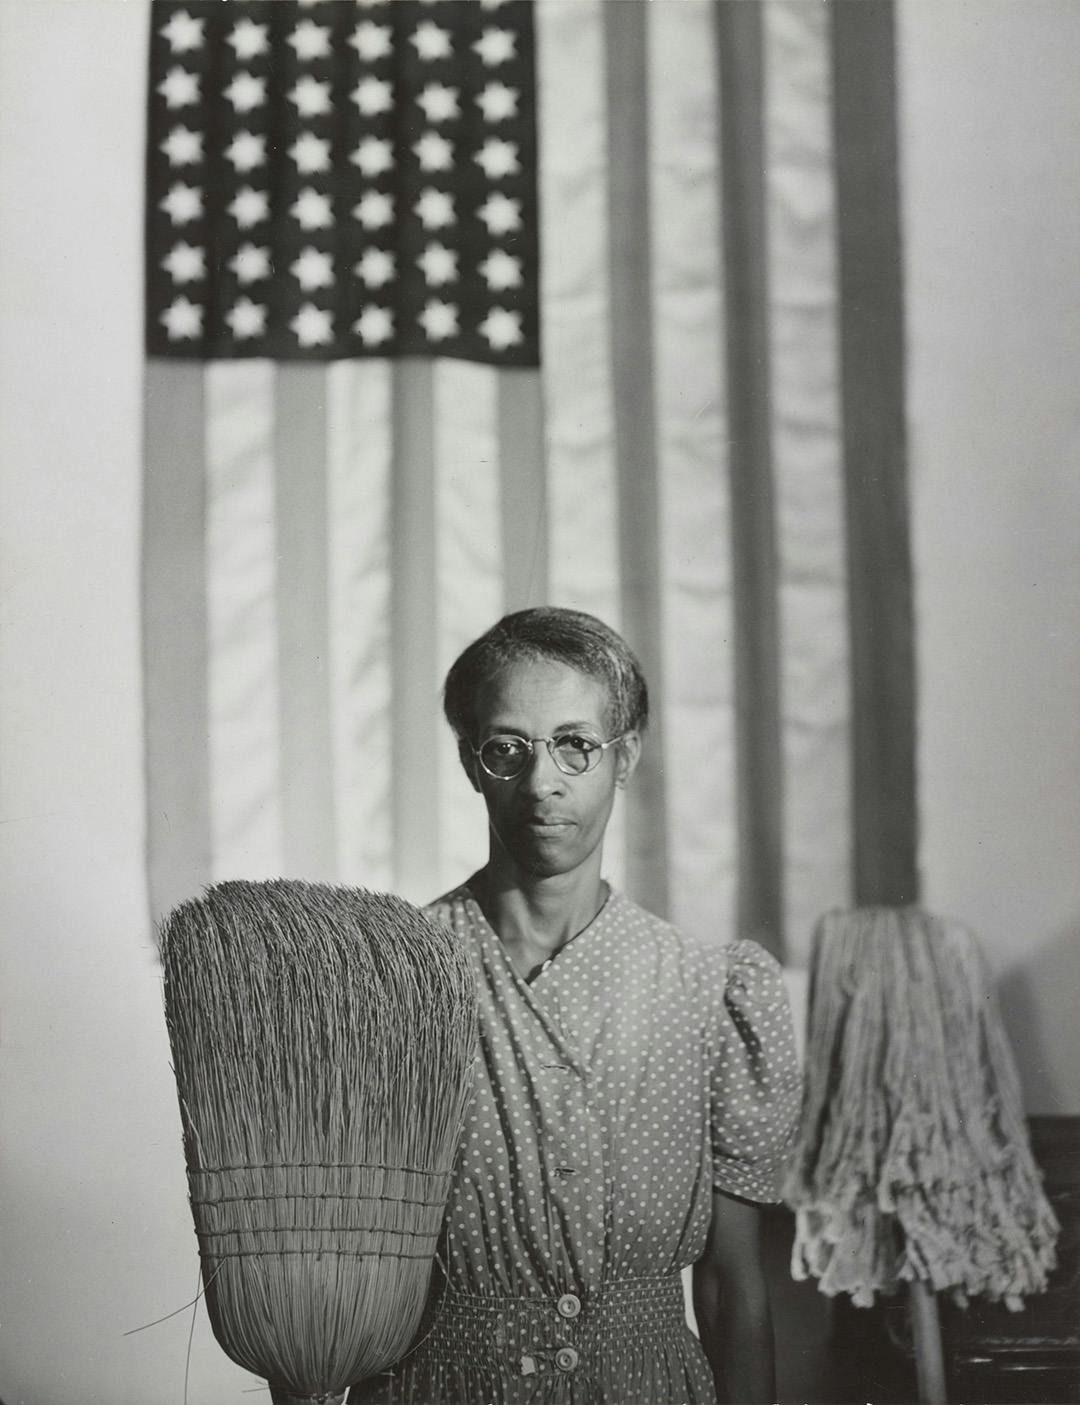 A woman holding a broom, with the straw up, in one hand and a mop, with the business end up, in the other hand.  She is posed in front of an American flag.  